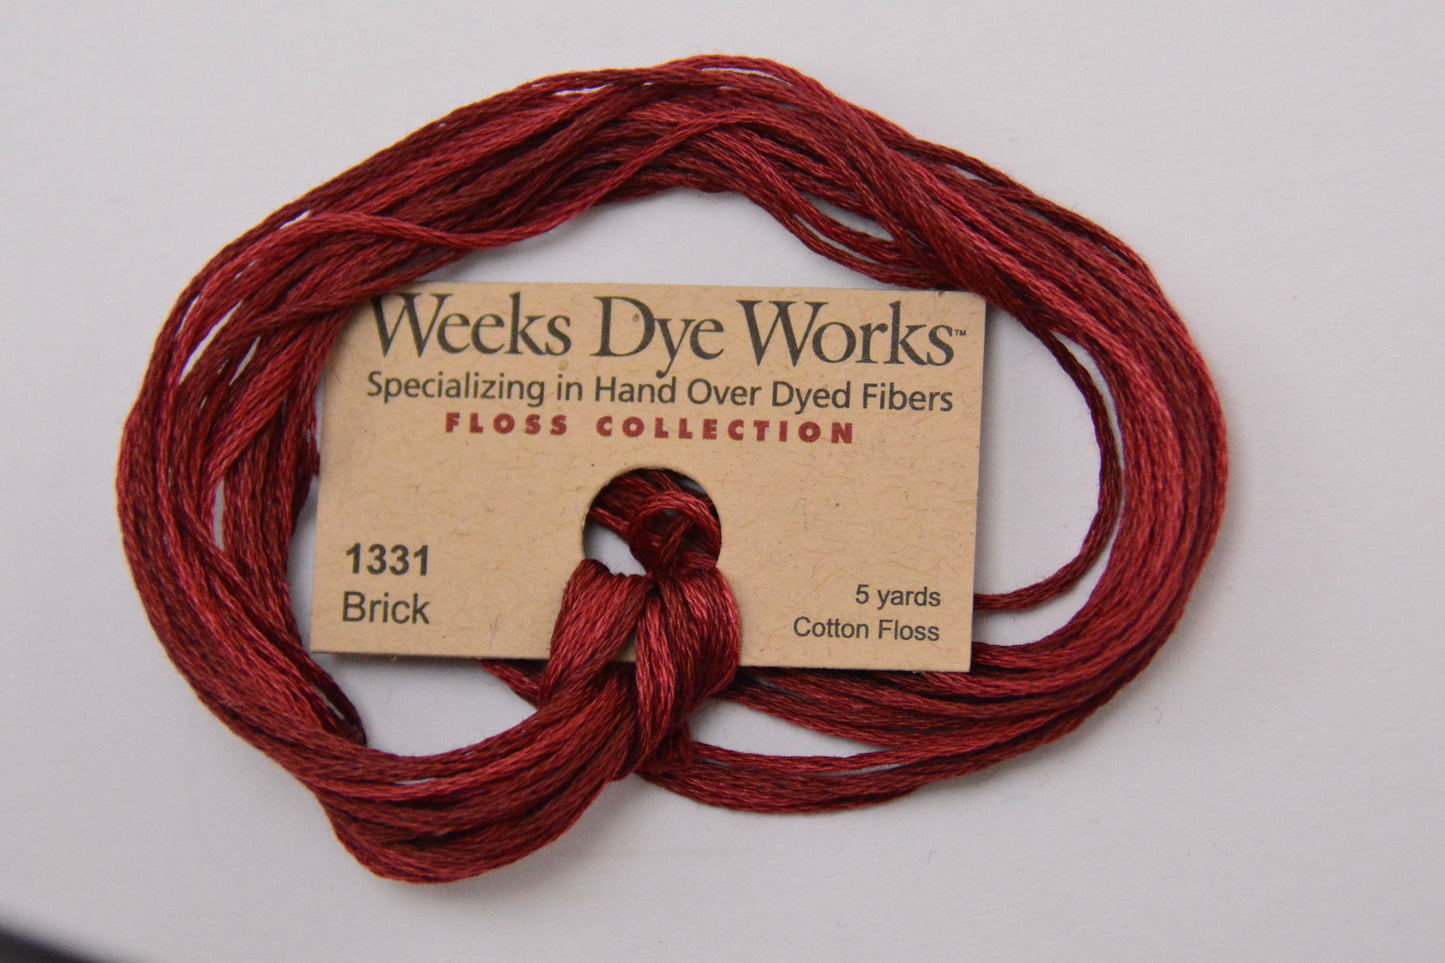 Brick 1331 Weeks Dye Works 6-Strand Hand-Dyed Embroidery Floss